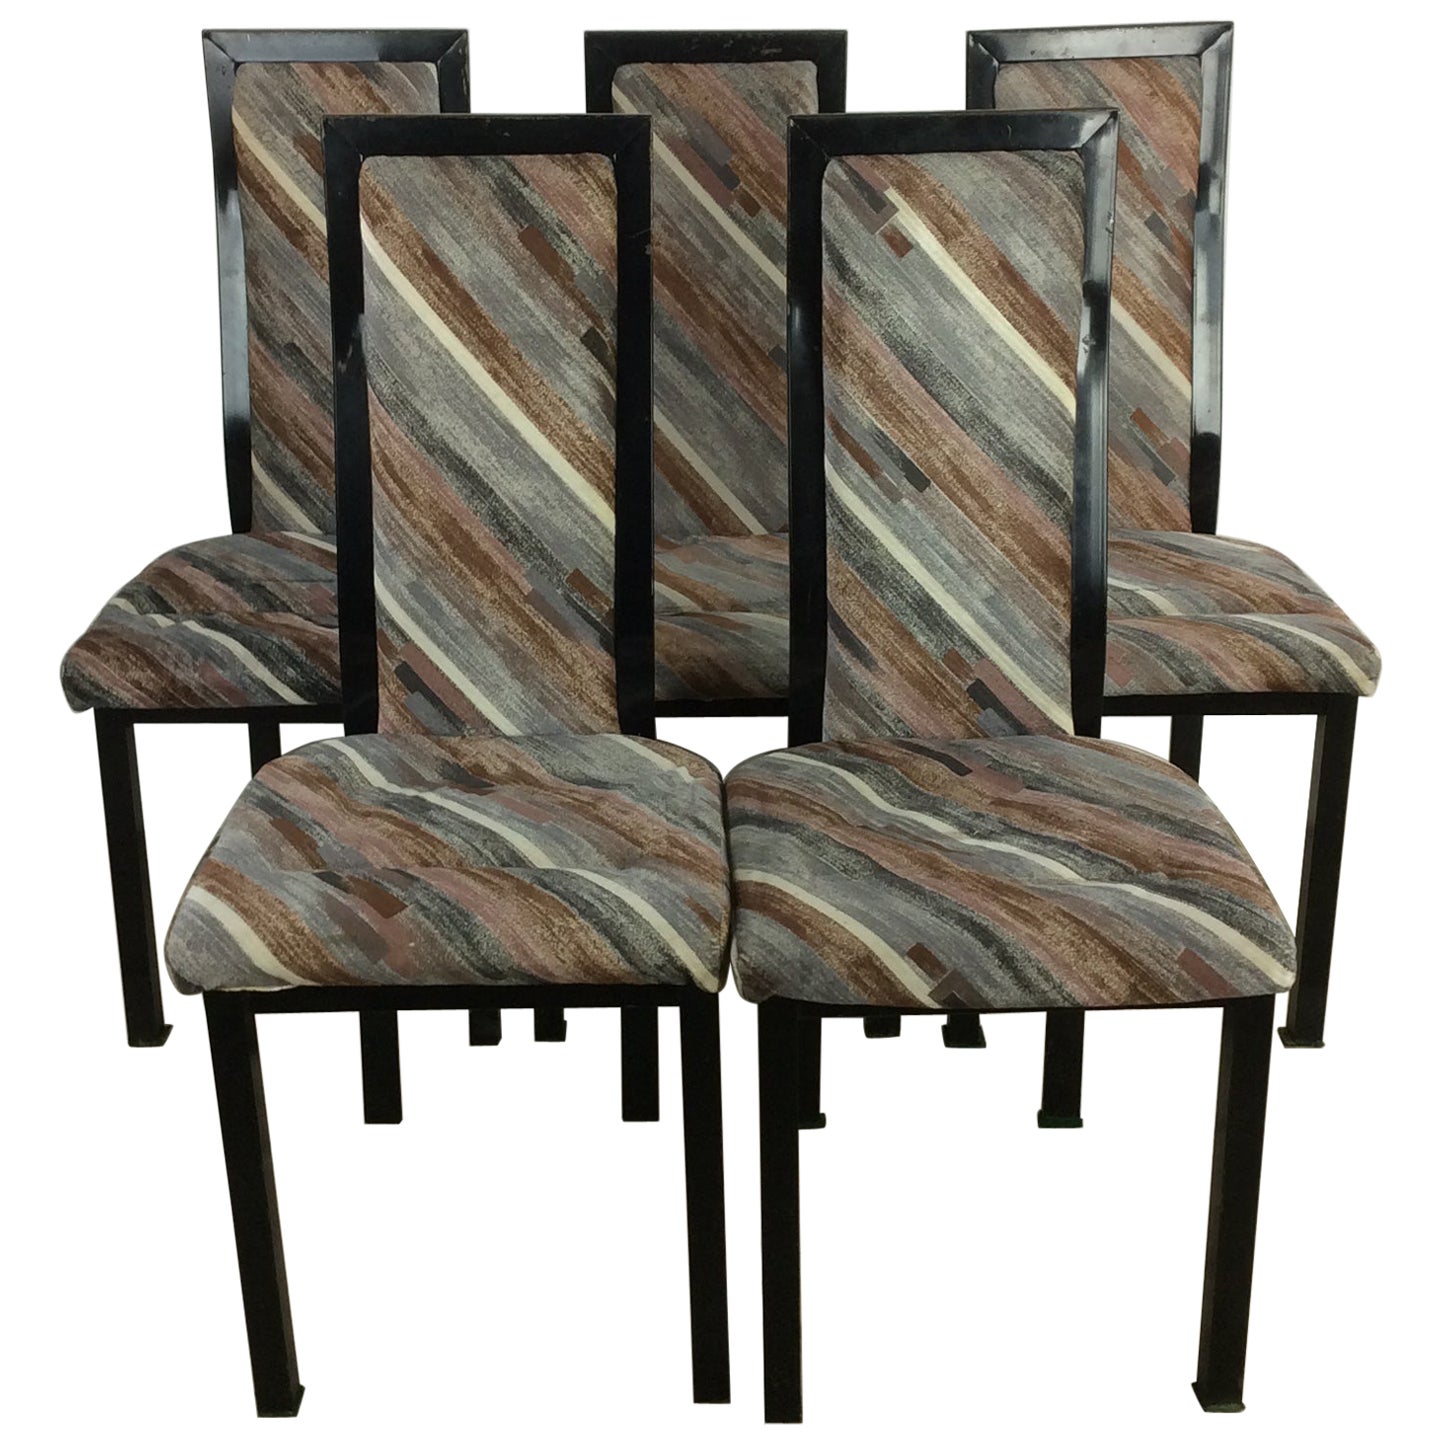 Set of 5 Postmodern Dining Chairs with Vintage Upholstery